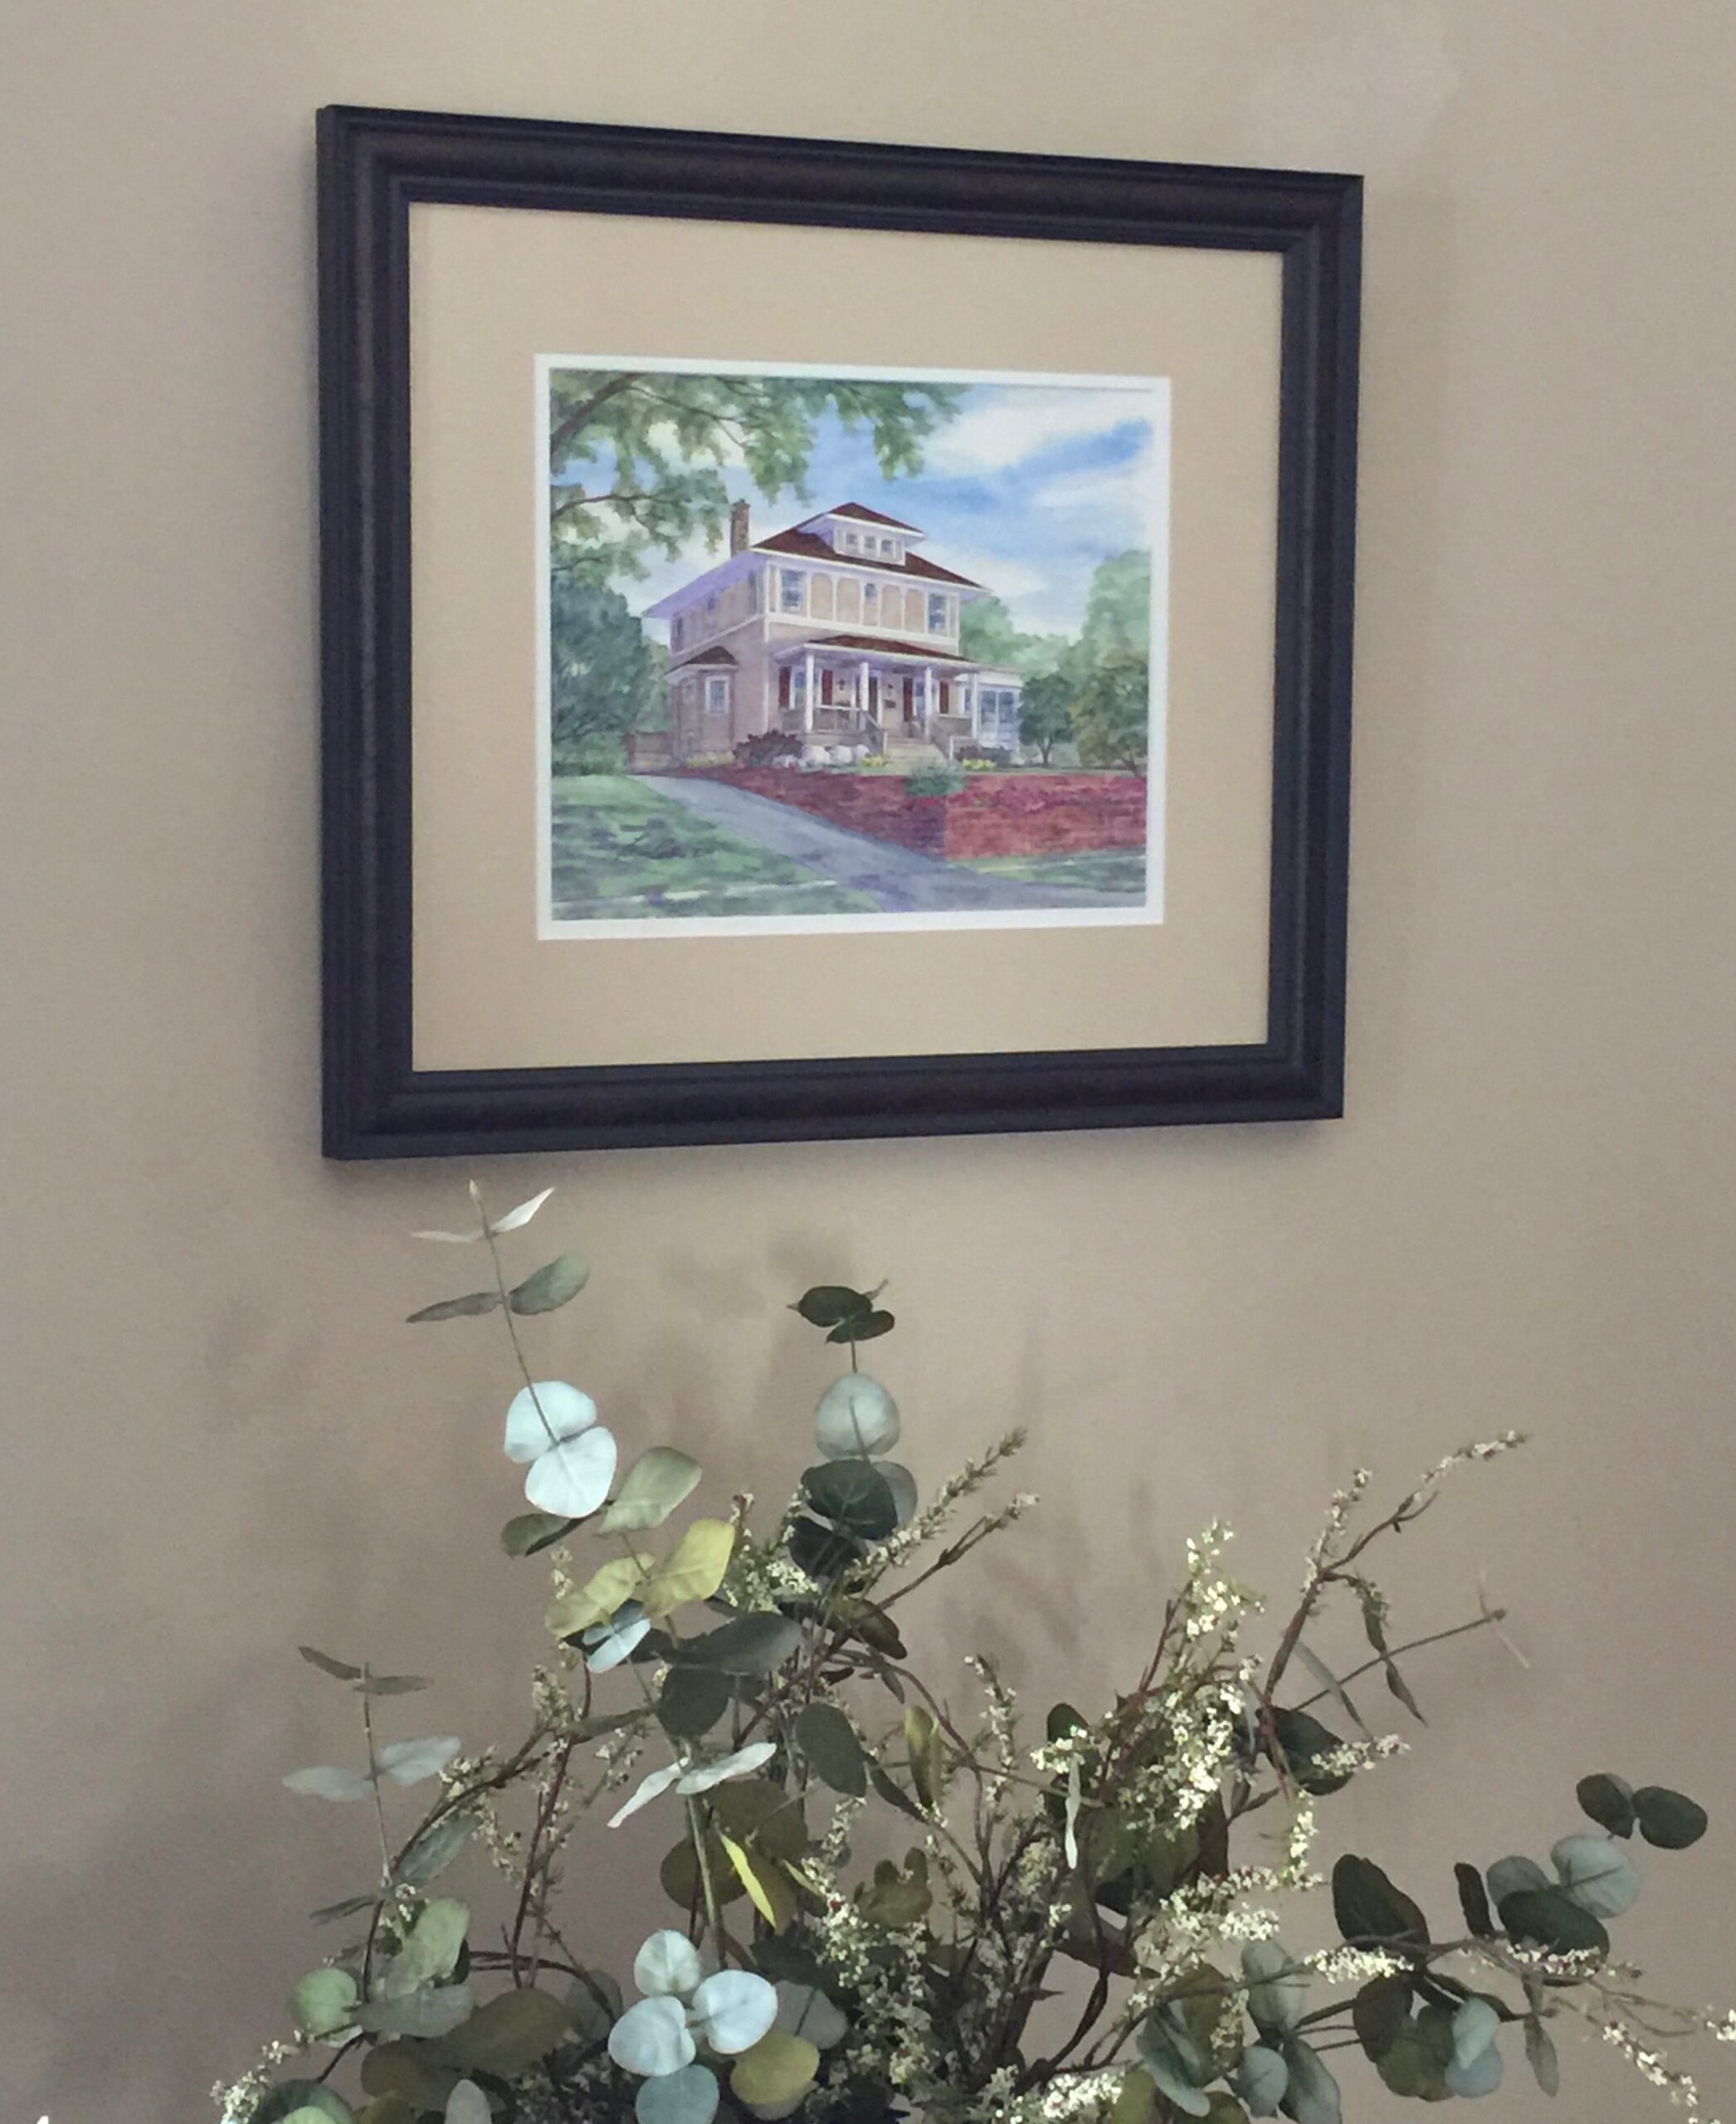 My client Gail in Omaha NE sent this photo of her beautifully framed painting of her home.